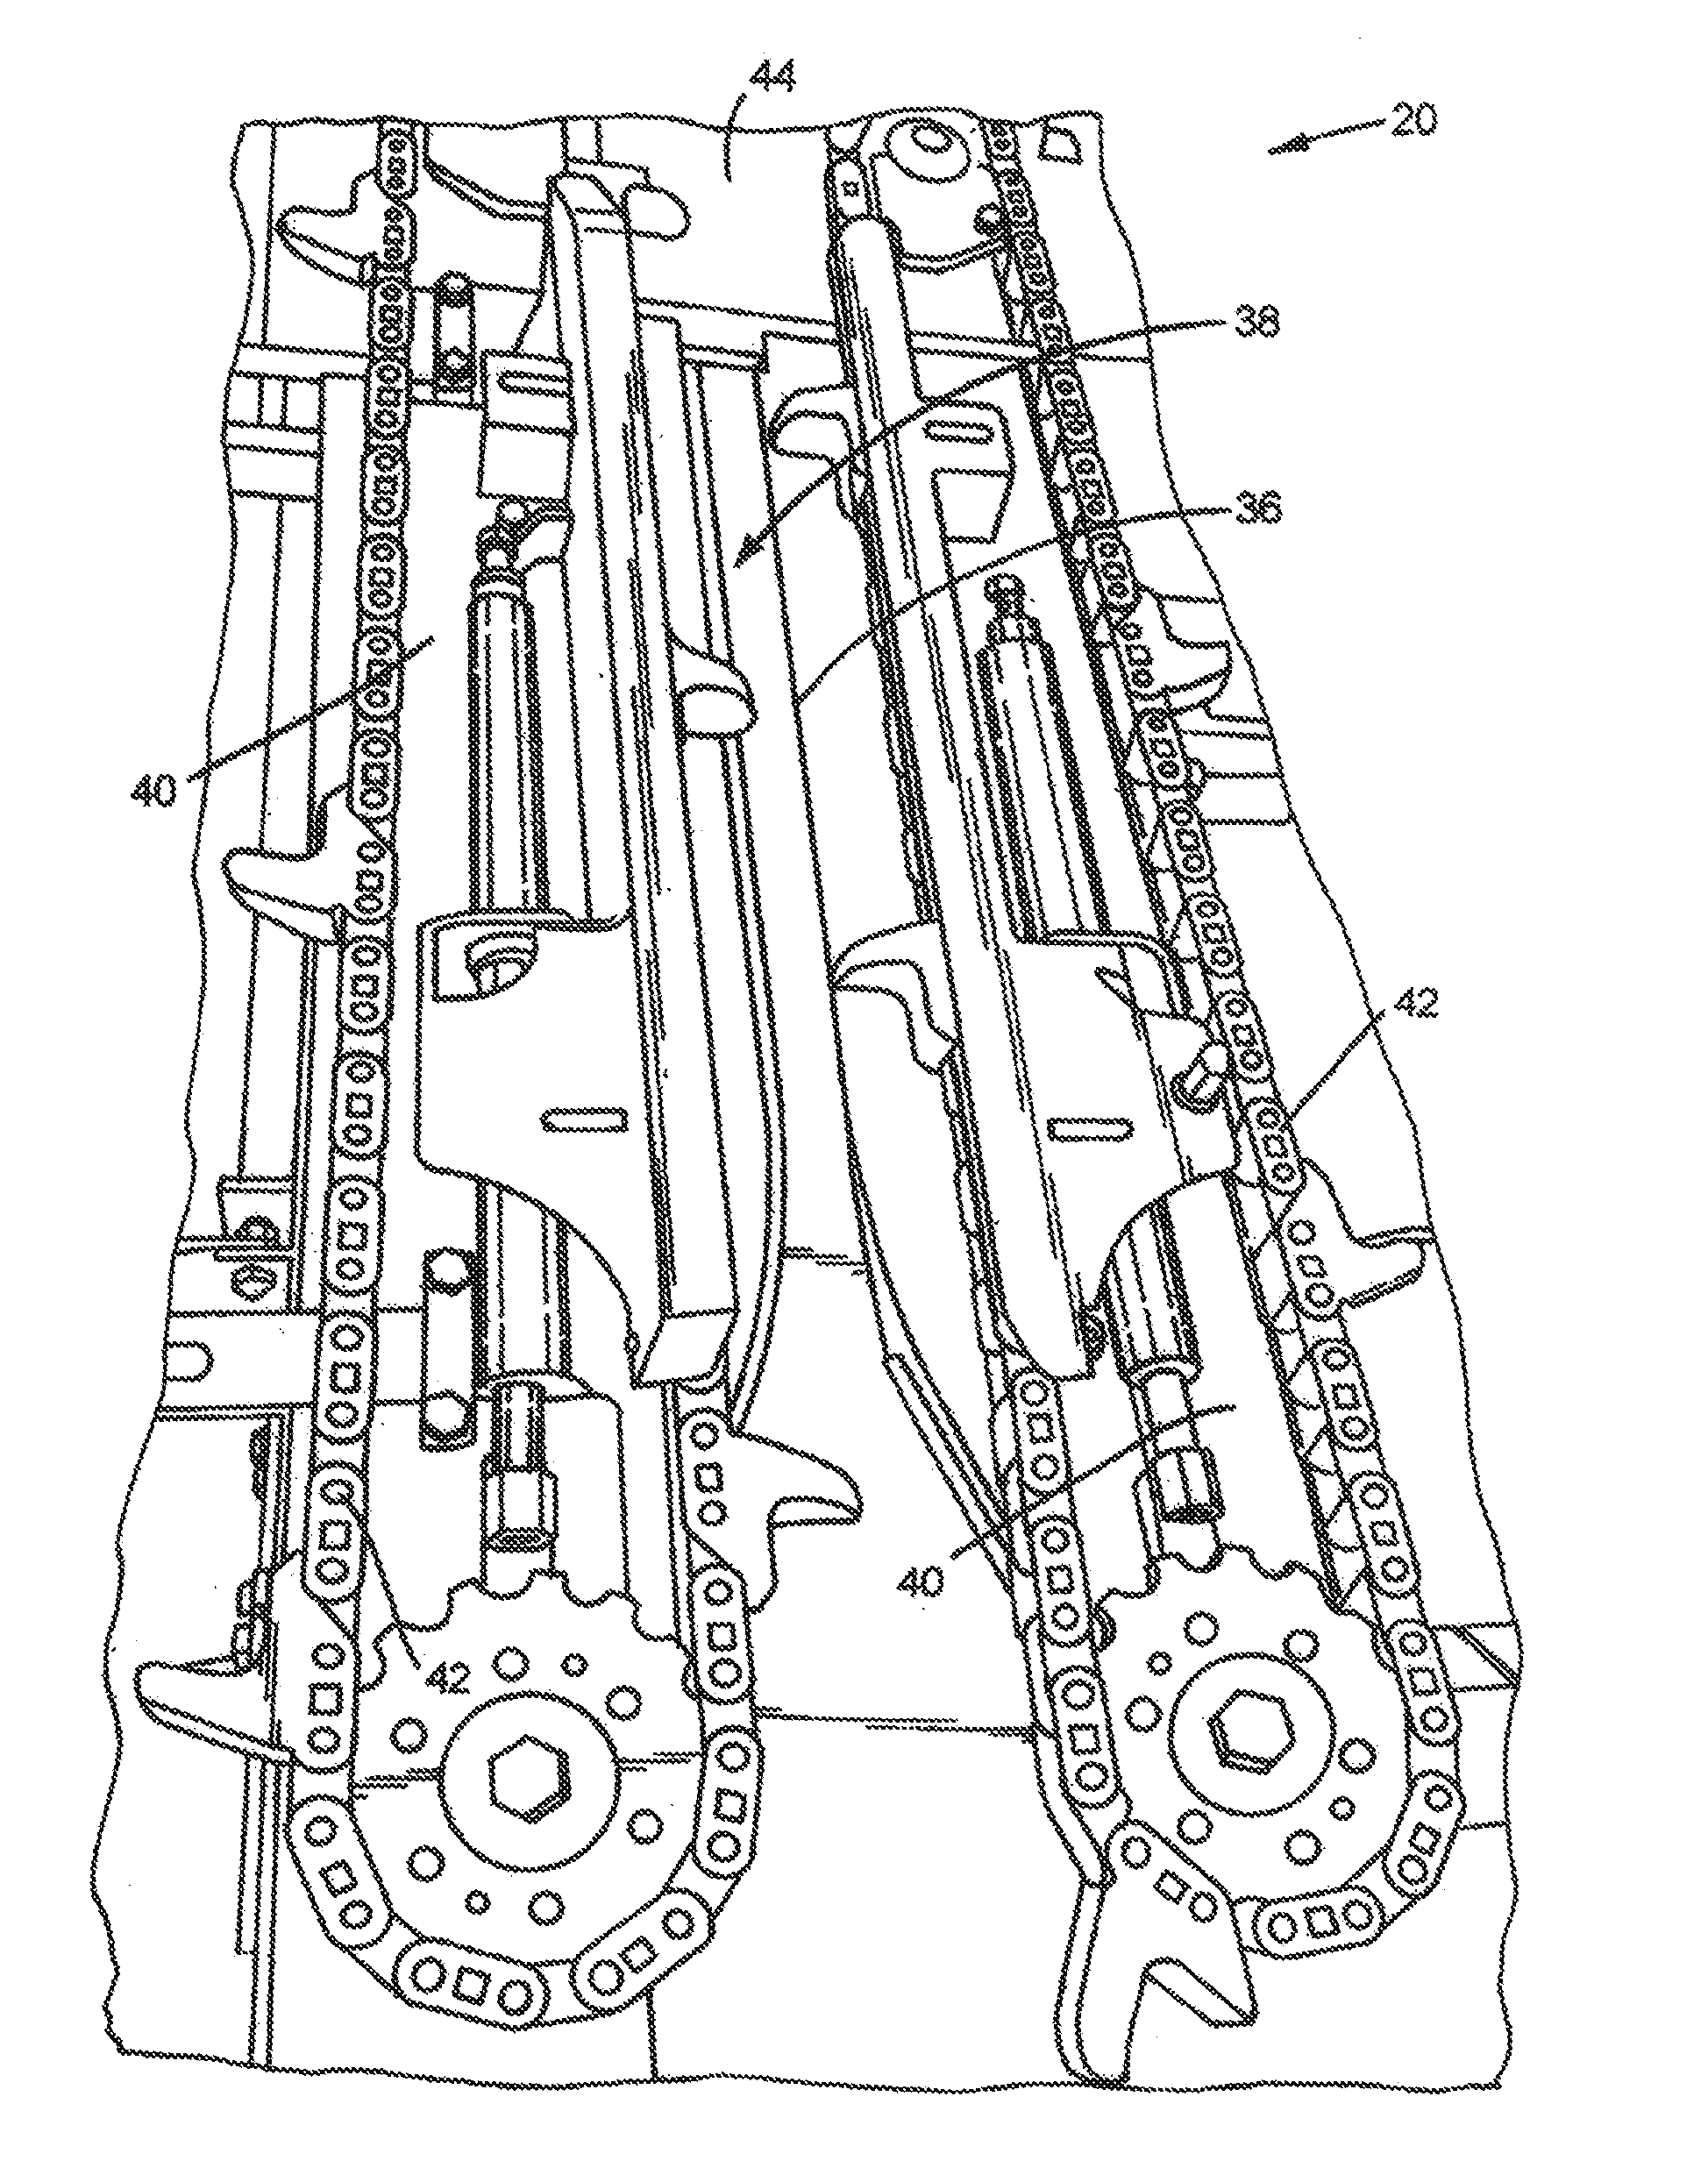 Adjustable row unit deck plate for a header of an agricultural harvester